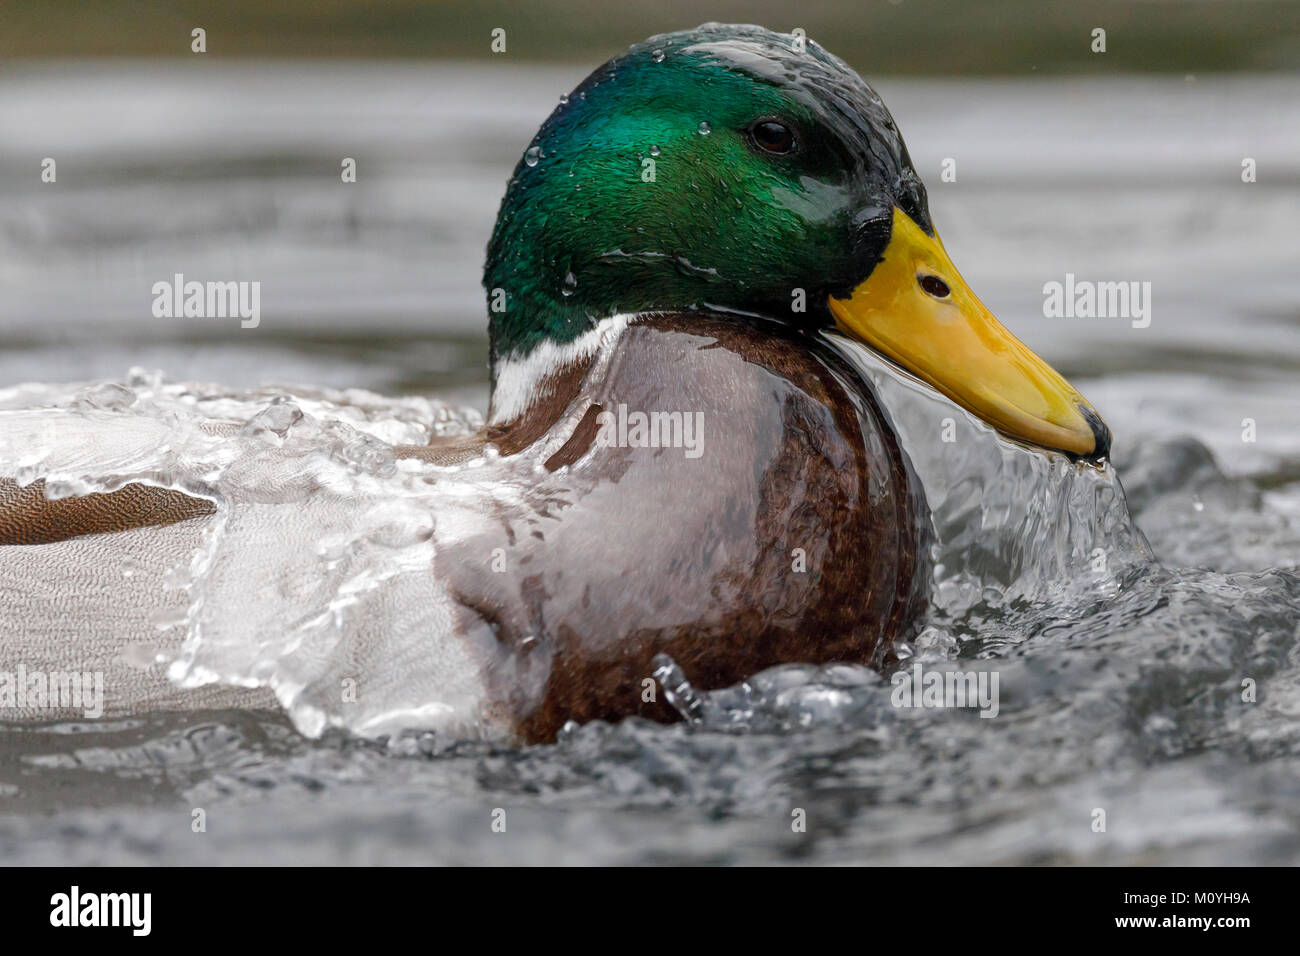 Stockente,(Anas platyrhynchos) emerges from the water,Germany Stock Photo